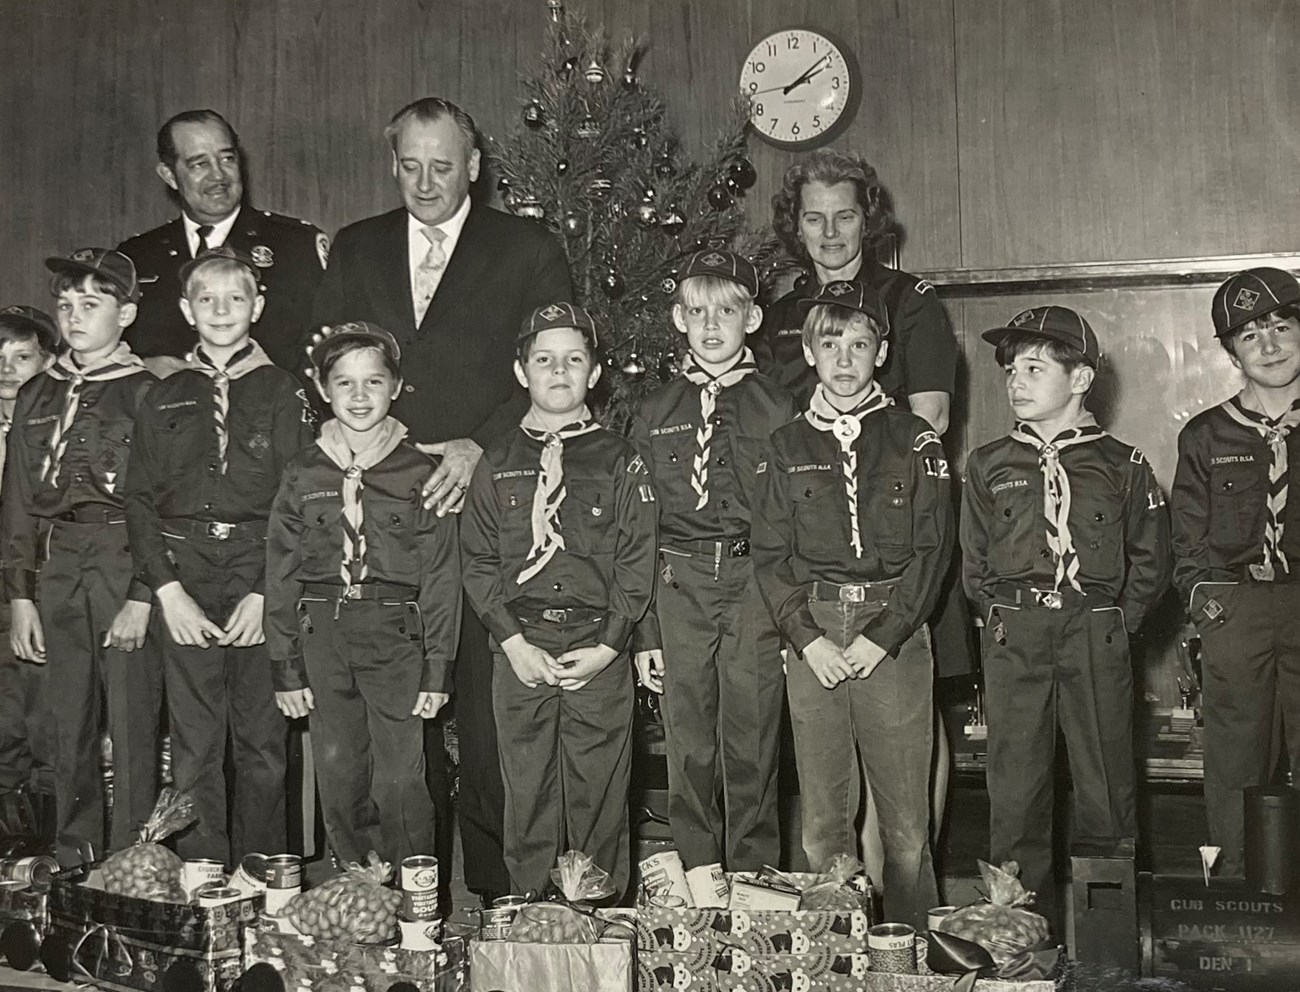 Three adults stand behind a troop of boy scouts standing in front of a train made of presents